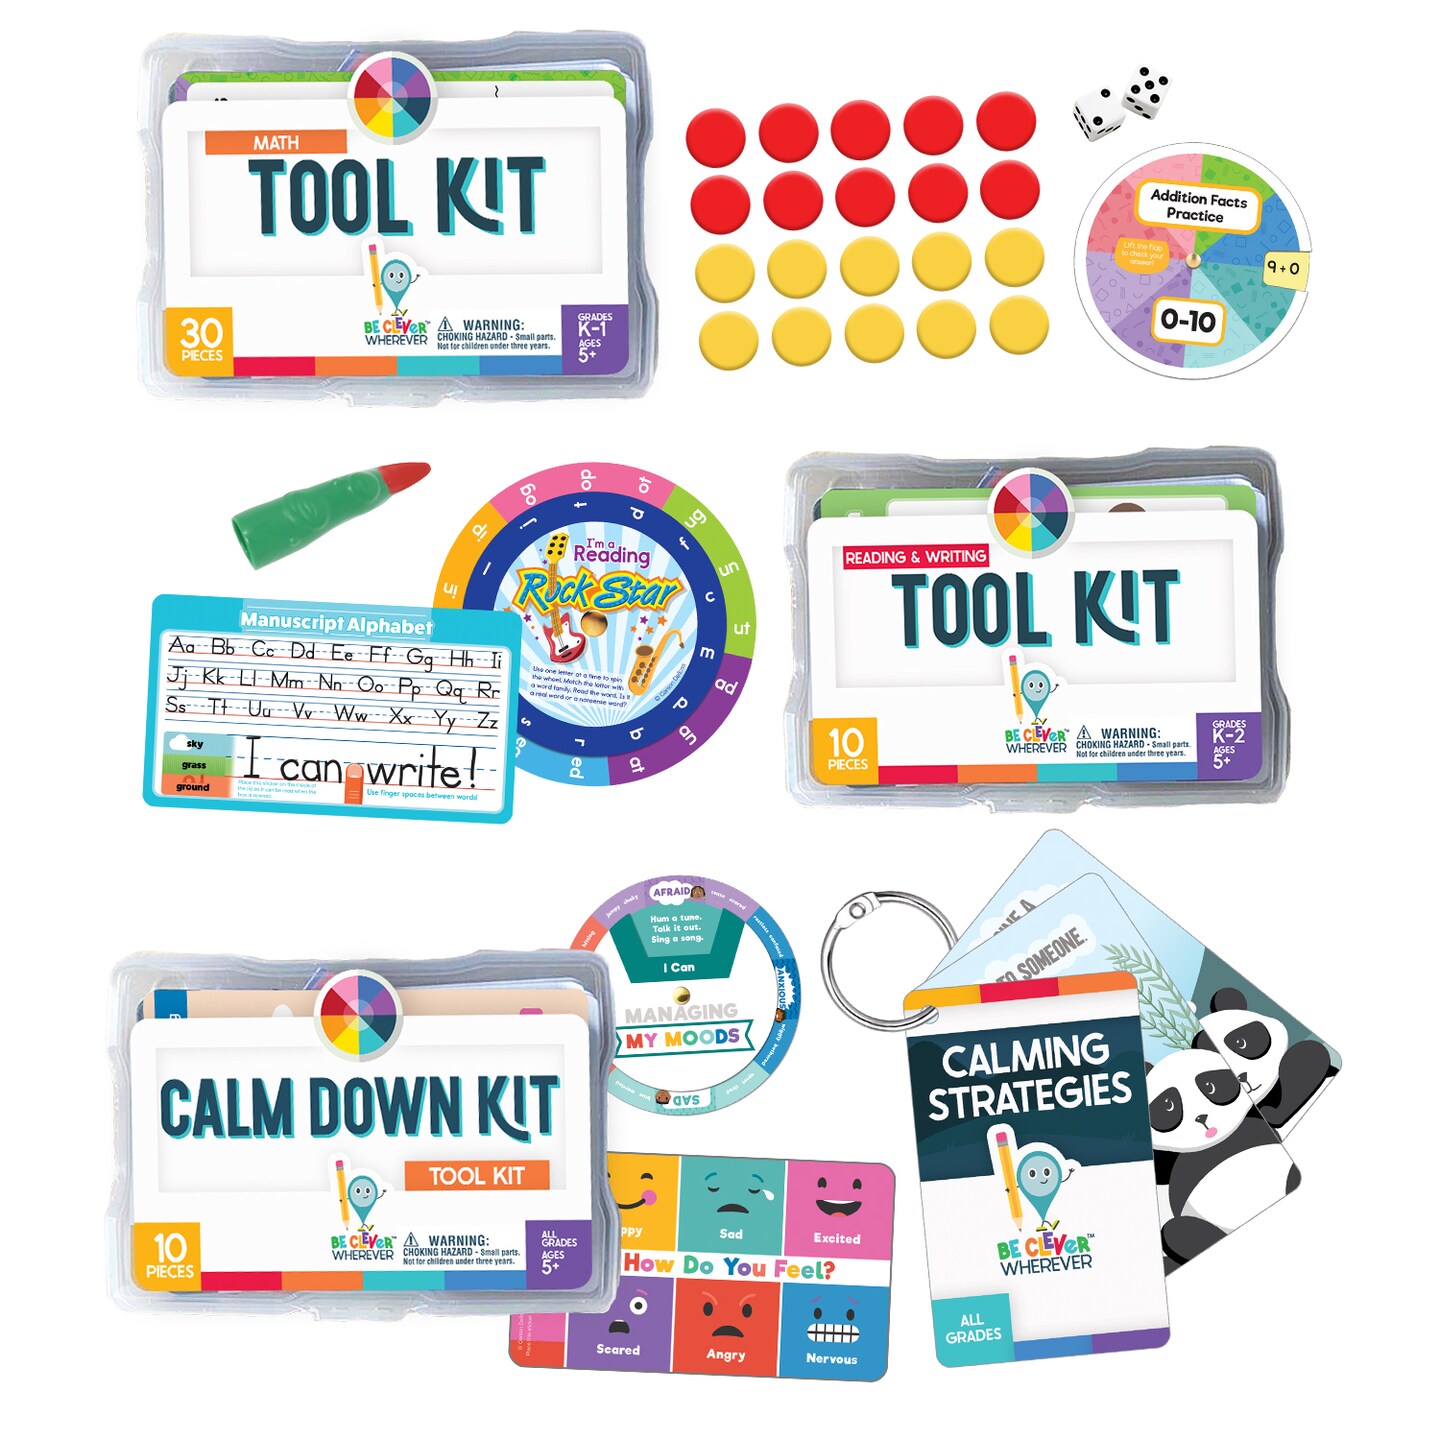 Be Clever Wherever Kindergarten Kit, Calm Down Corner Kit, Calming Down Strategies Things on Rings Flash Cards, Kindergarten Math and Reading &#x26; Writing Tool Kits (66 Pc)